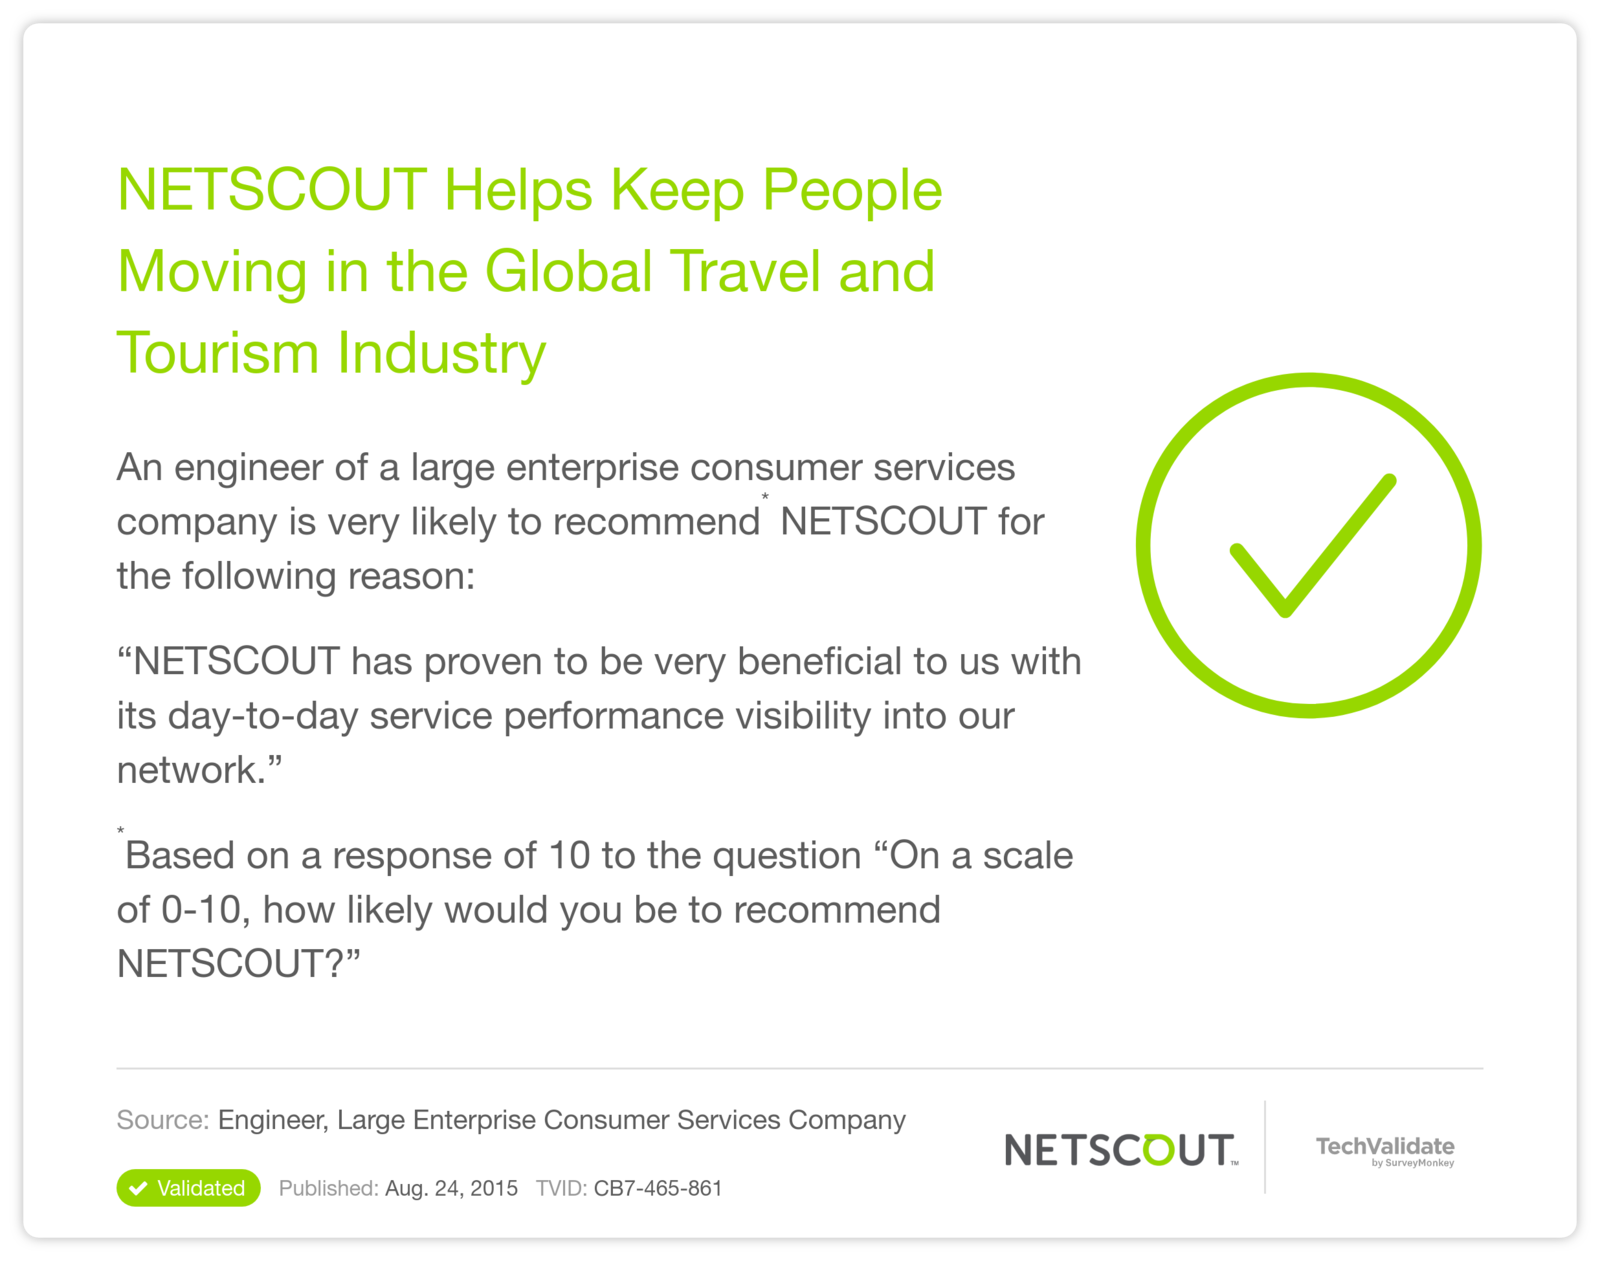 NETSCOUT Helps Keep People Moving in the Global Travel and Tourism Industry